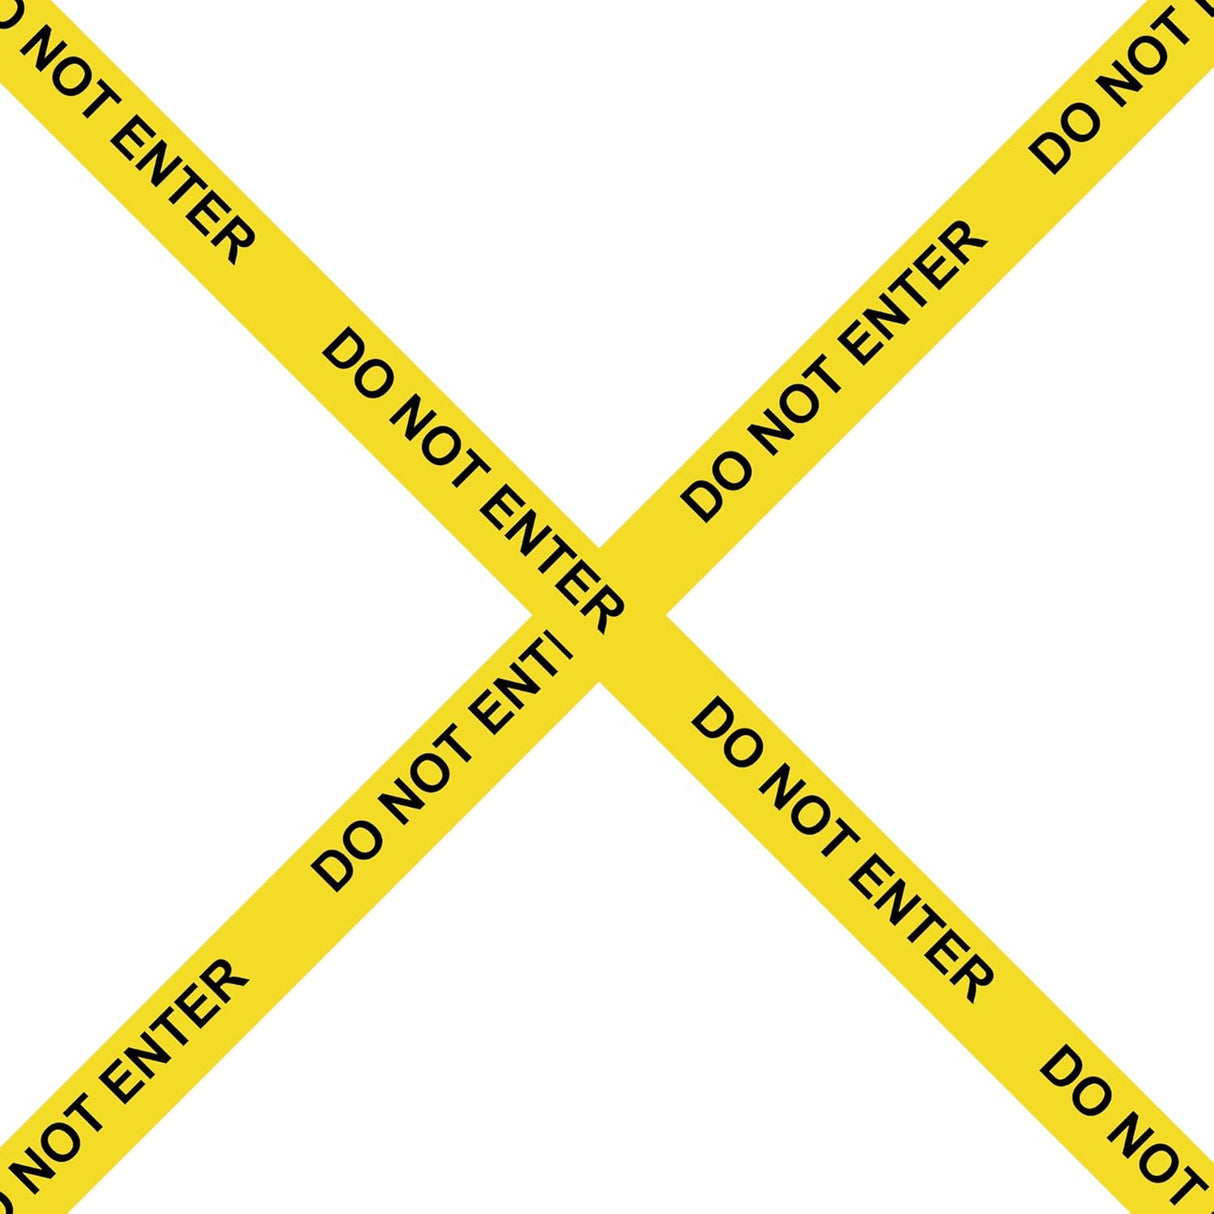 SINGHAL Do Not Enter Barricade Tape 3 Inch X 300 Meter, Bright Yellow with Bold Black Print, Wide for Maximum Readability, Tear Resistant Design, High Visibility 300mtr